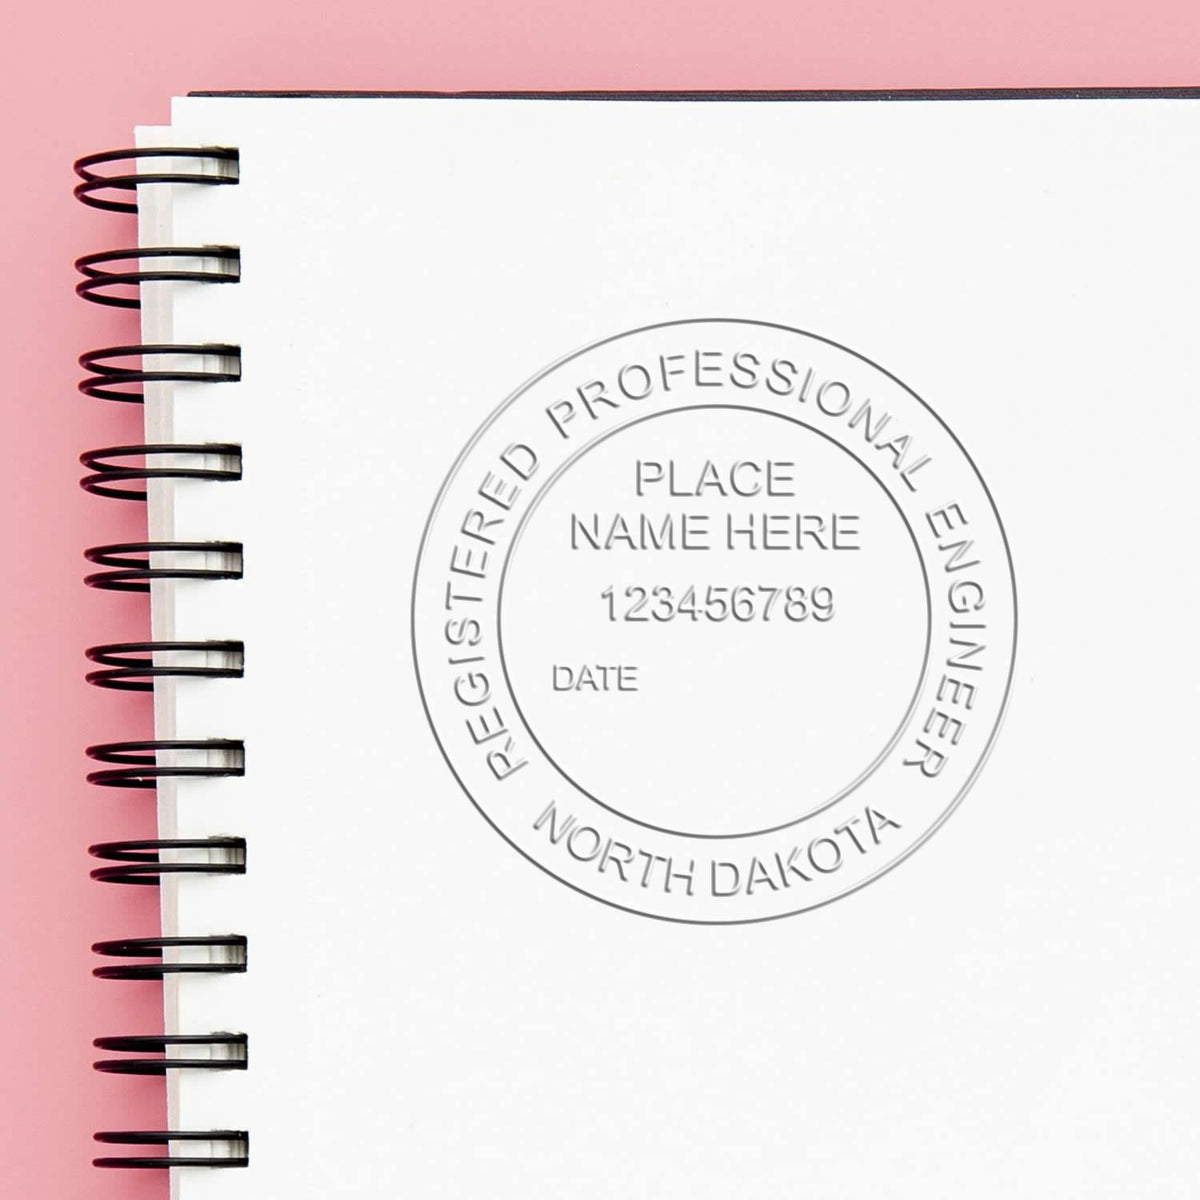 An in use photo of the Hybrid North Dakota Engineer Seal showing a sample imprint on a cardstock